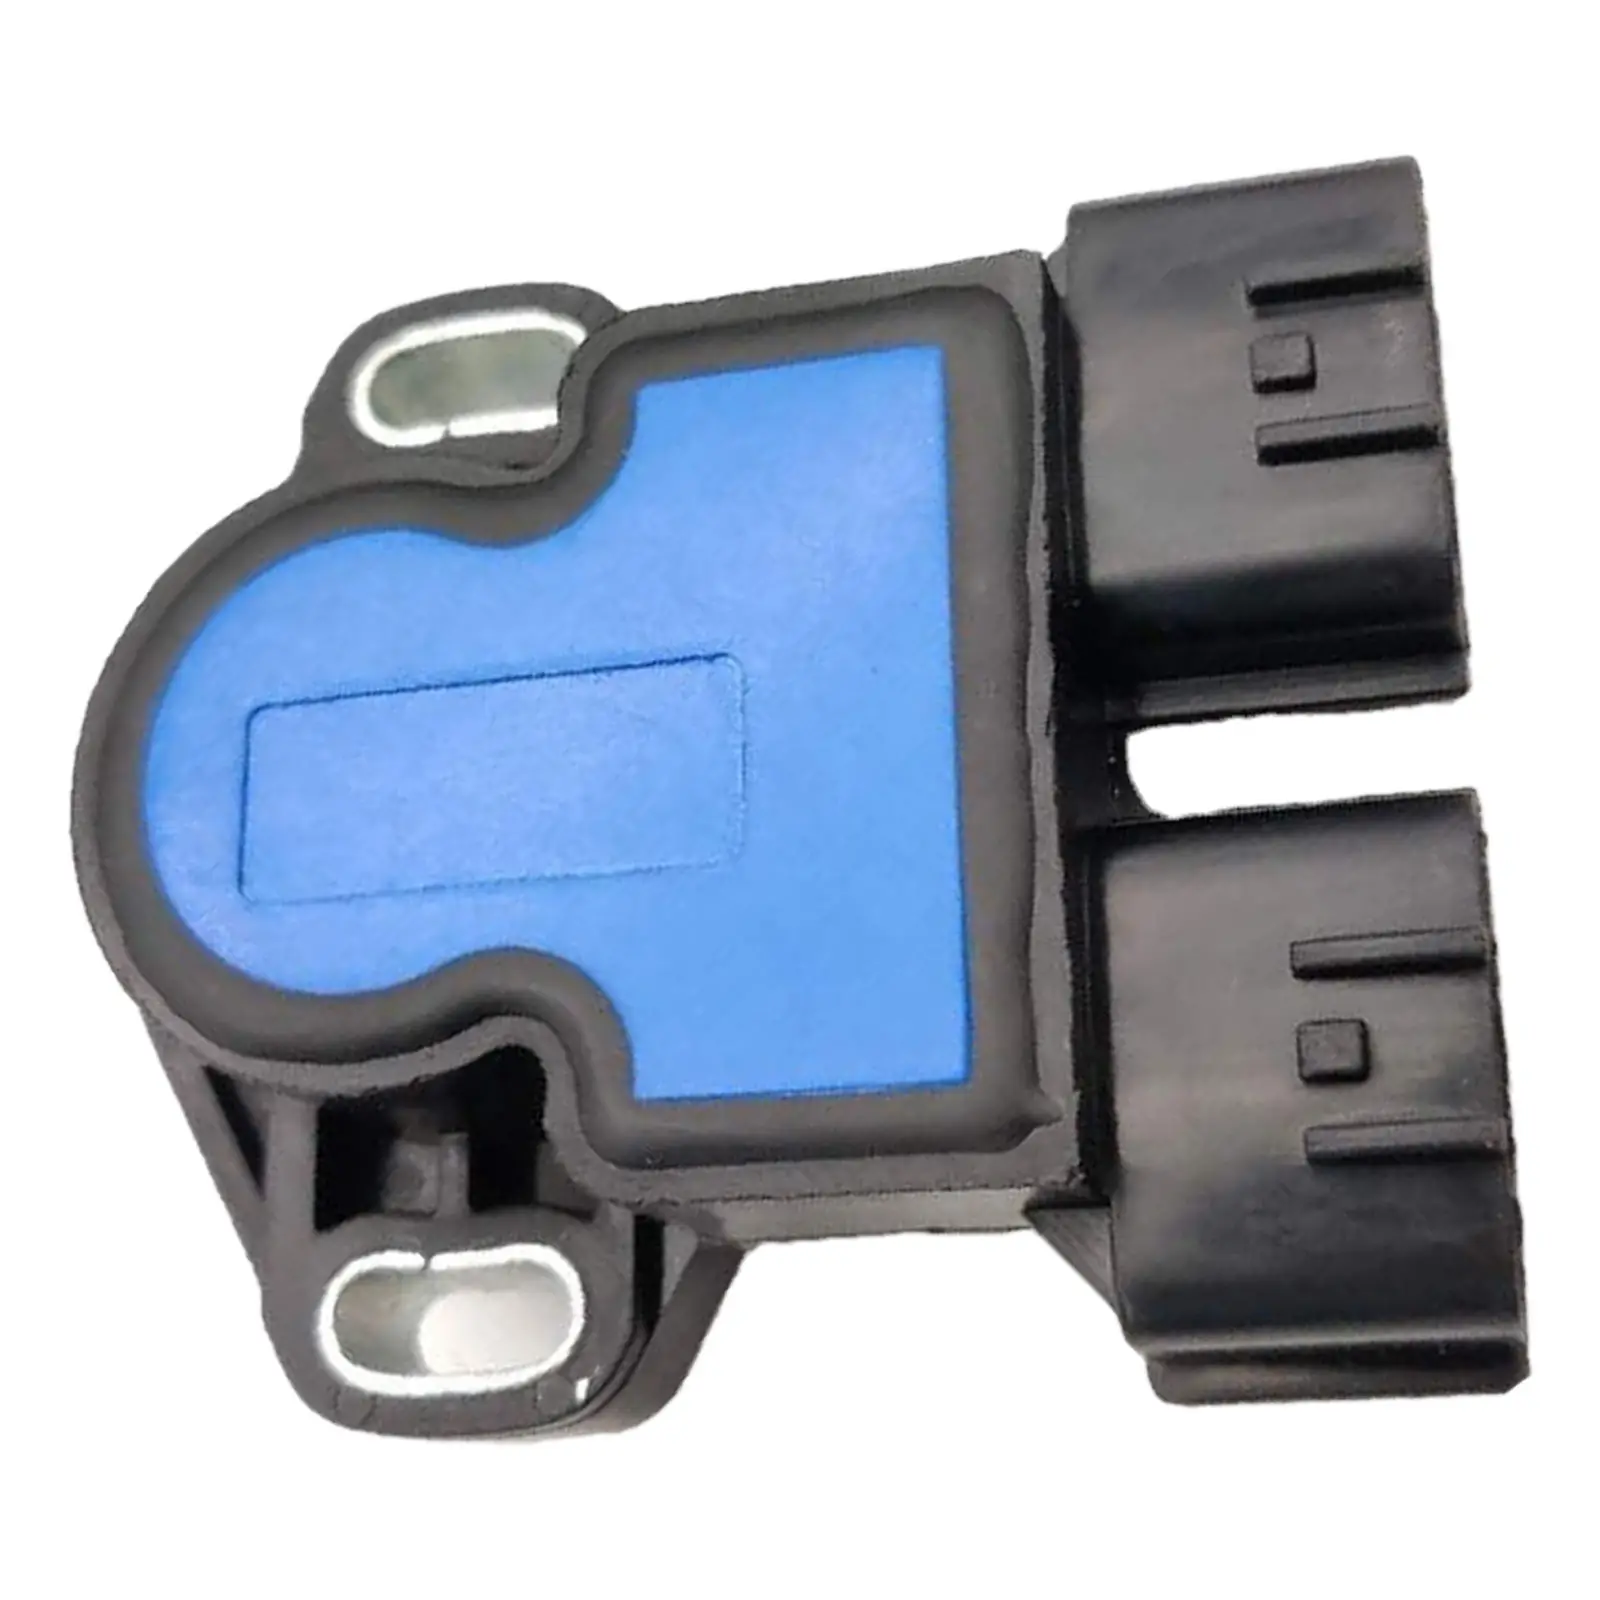 Throttle Position Sensor Fits for Nian Xterra Frontier Engine SERA486-07 8971631640 Replacement Acceories